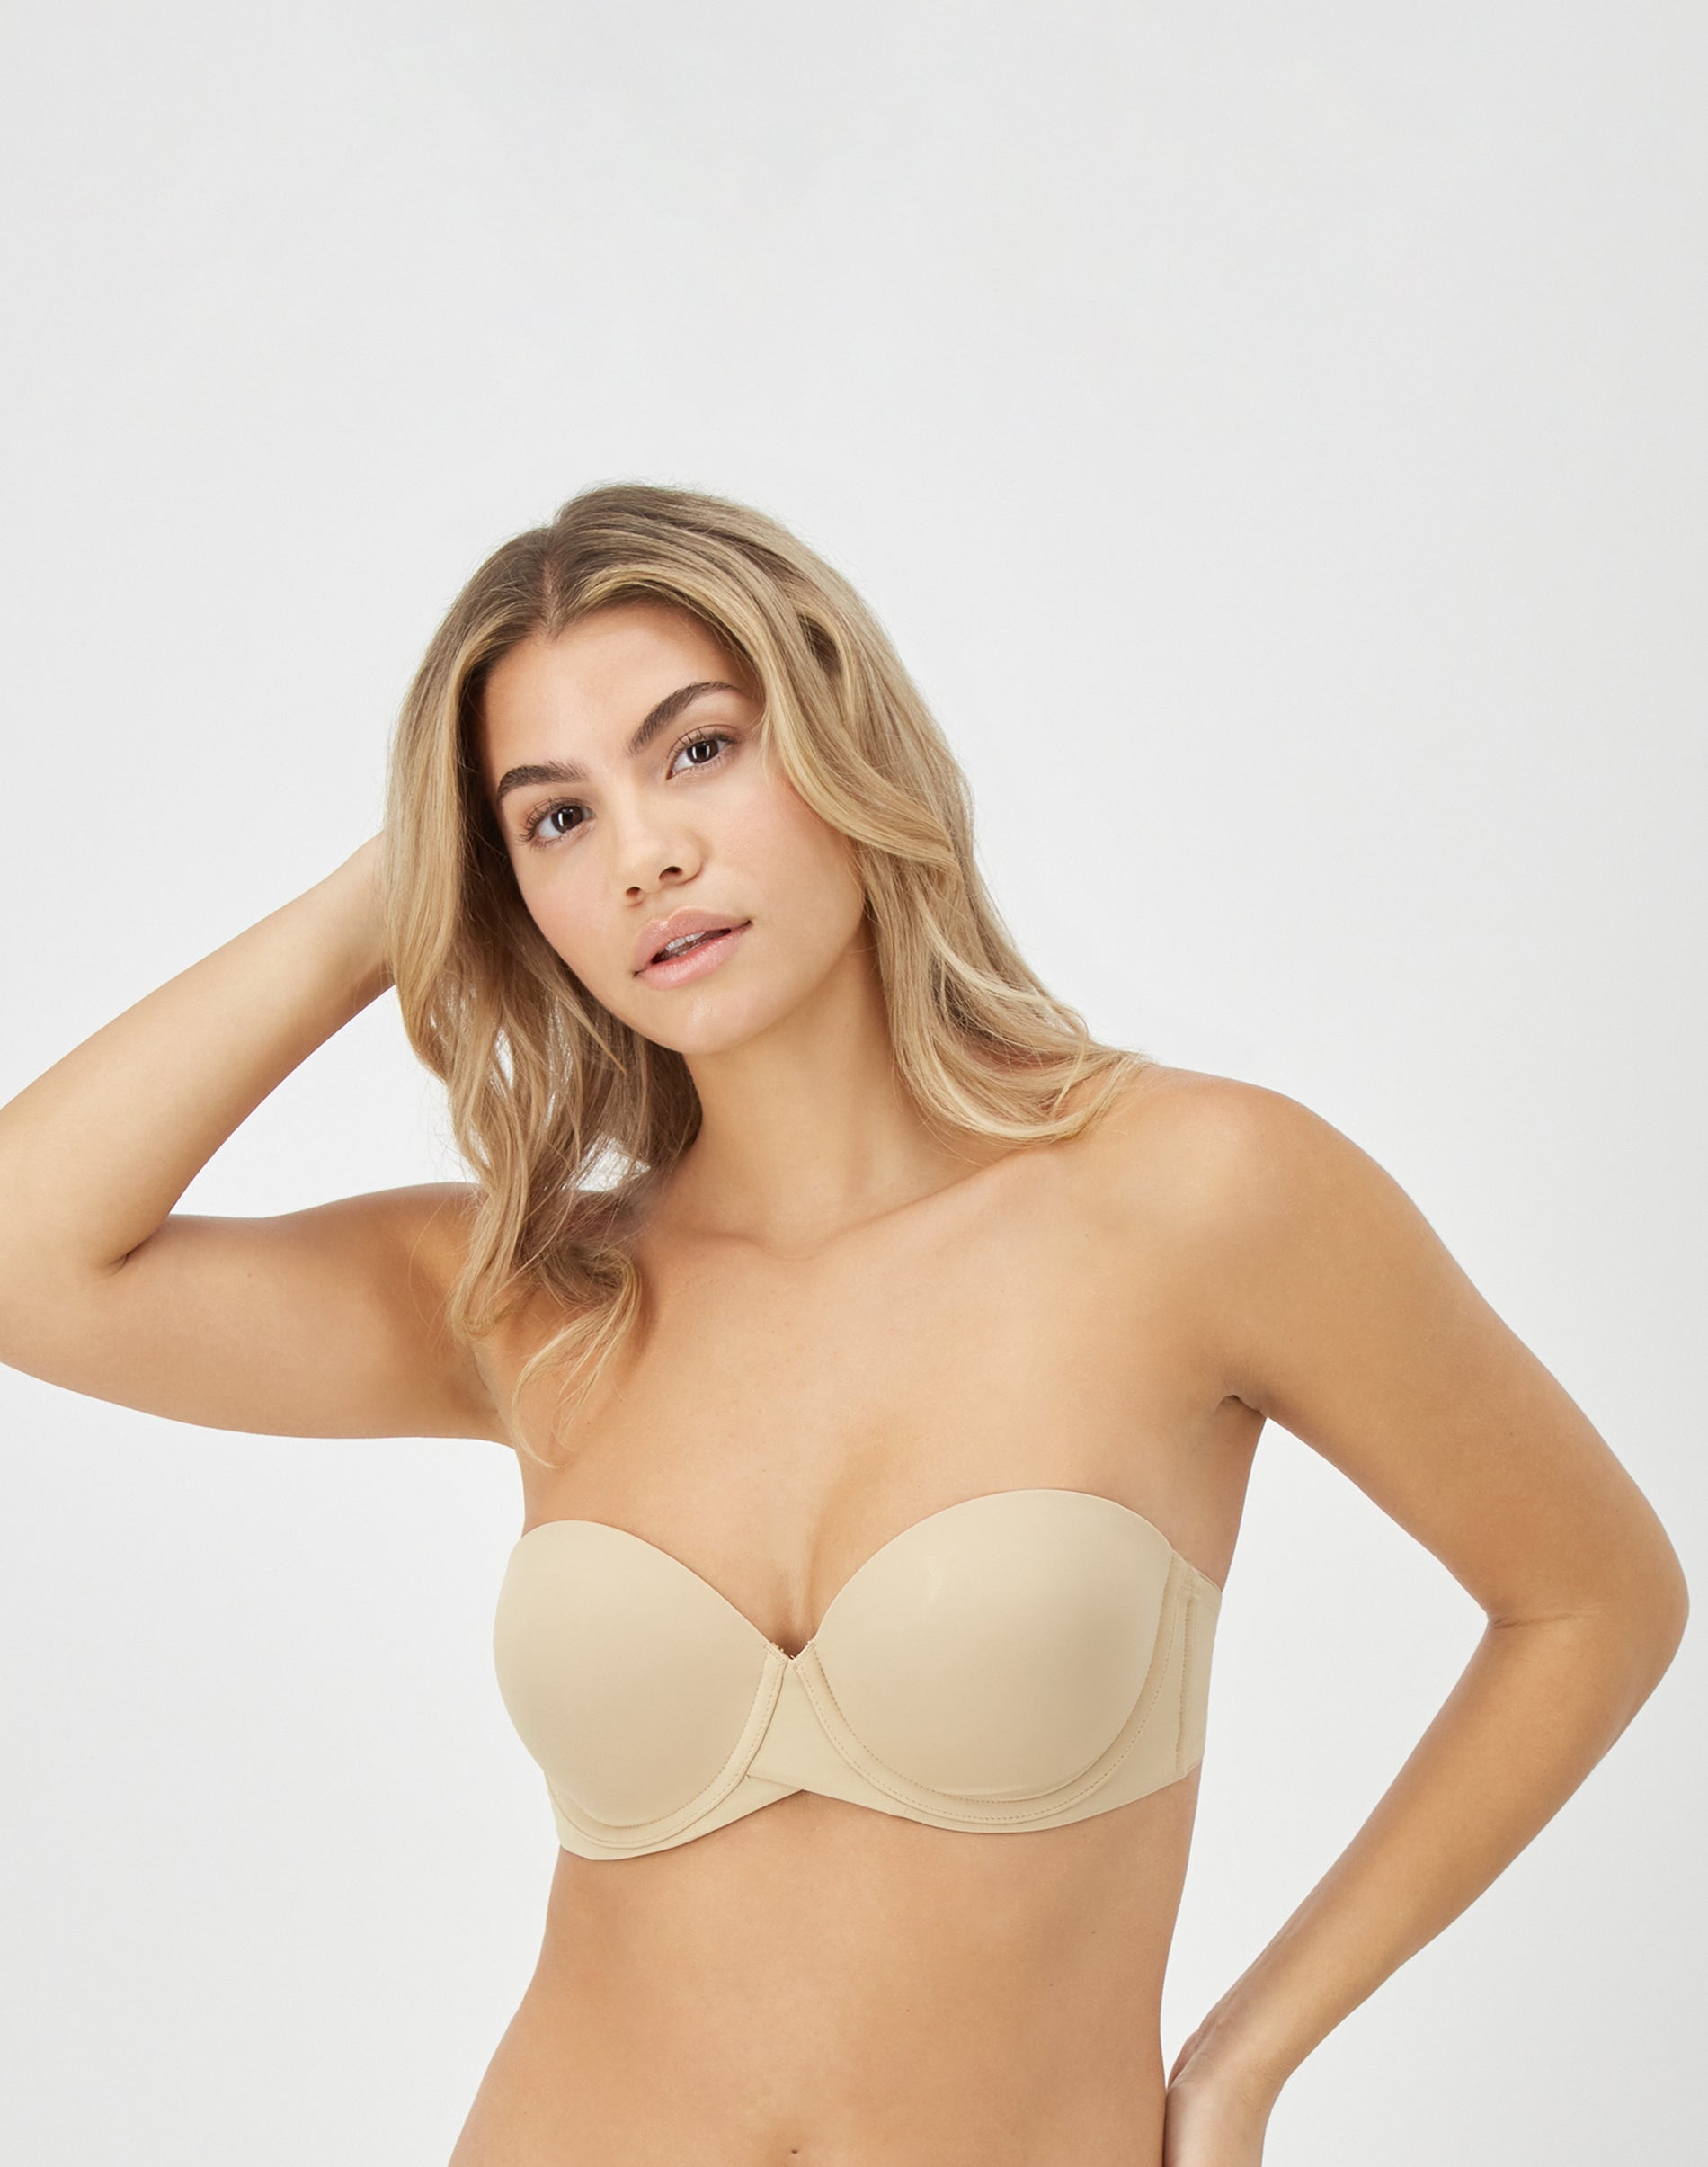 Best backless strapless bra - Stay-at-Home Moms, Forums